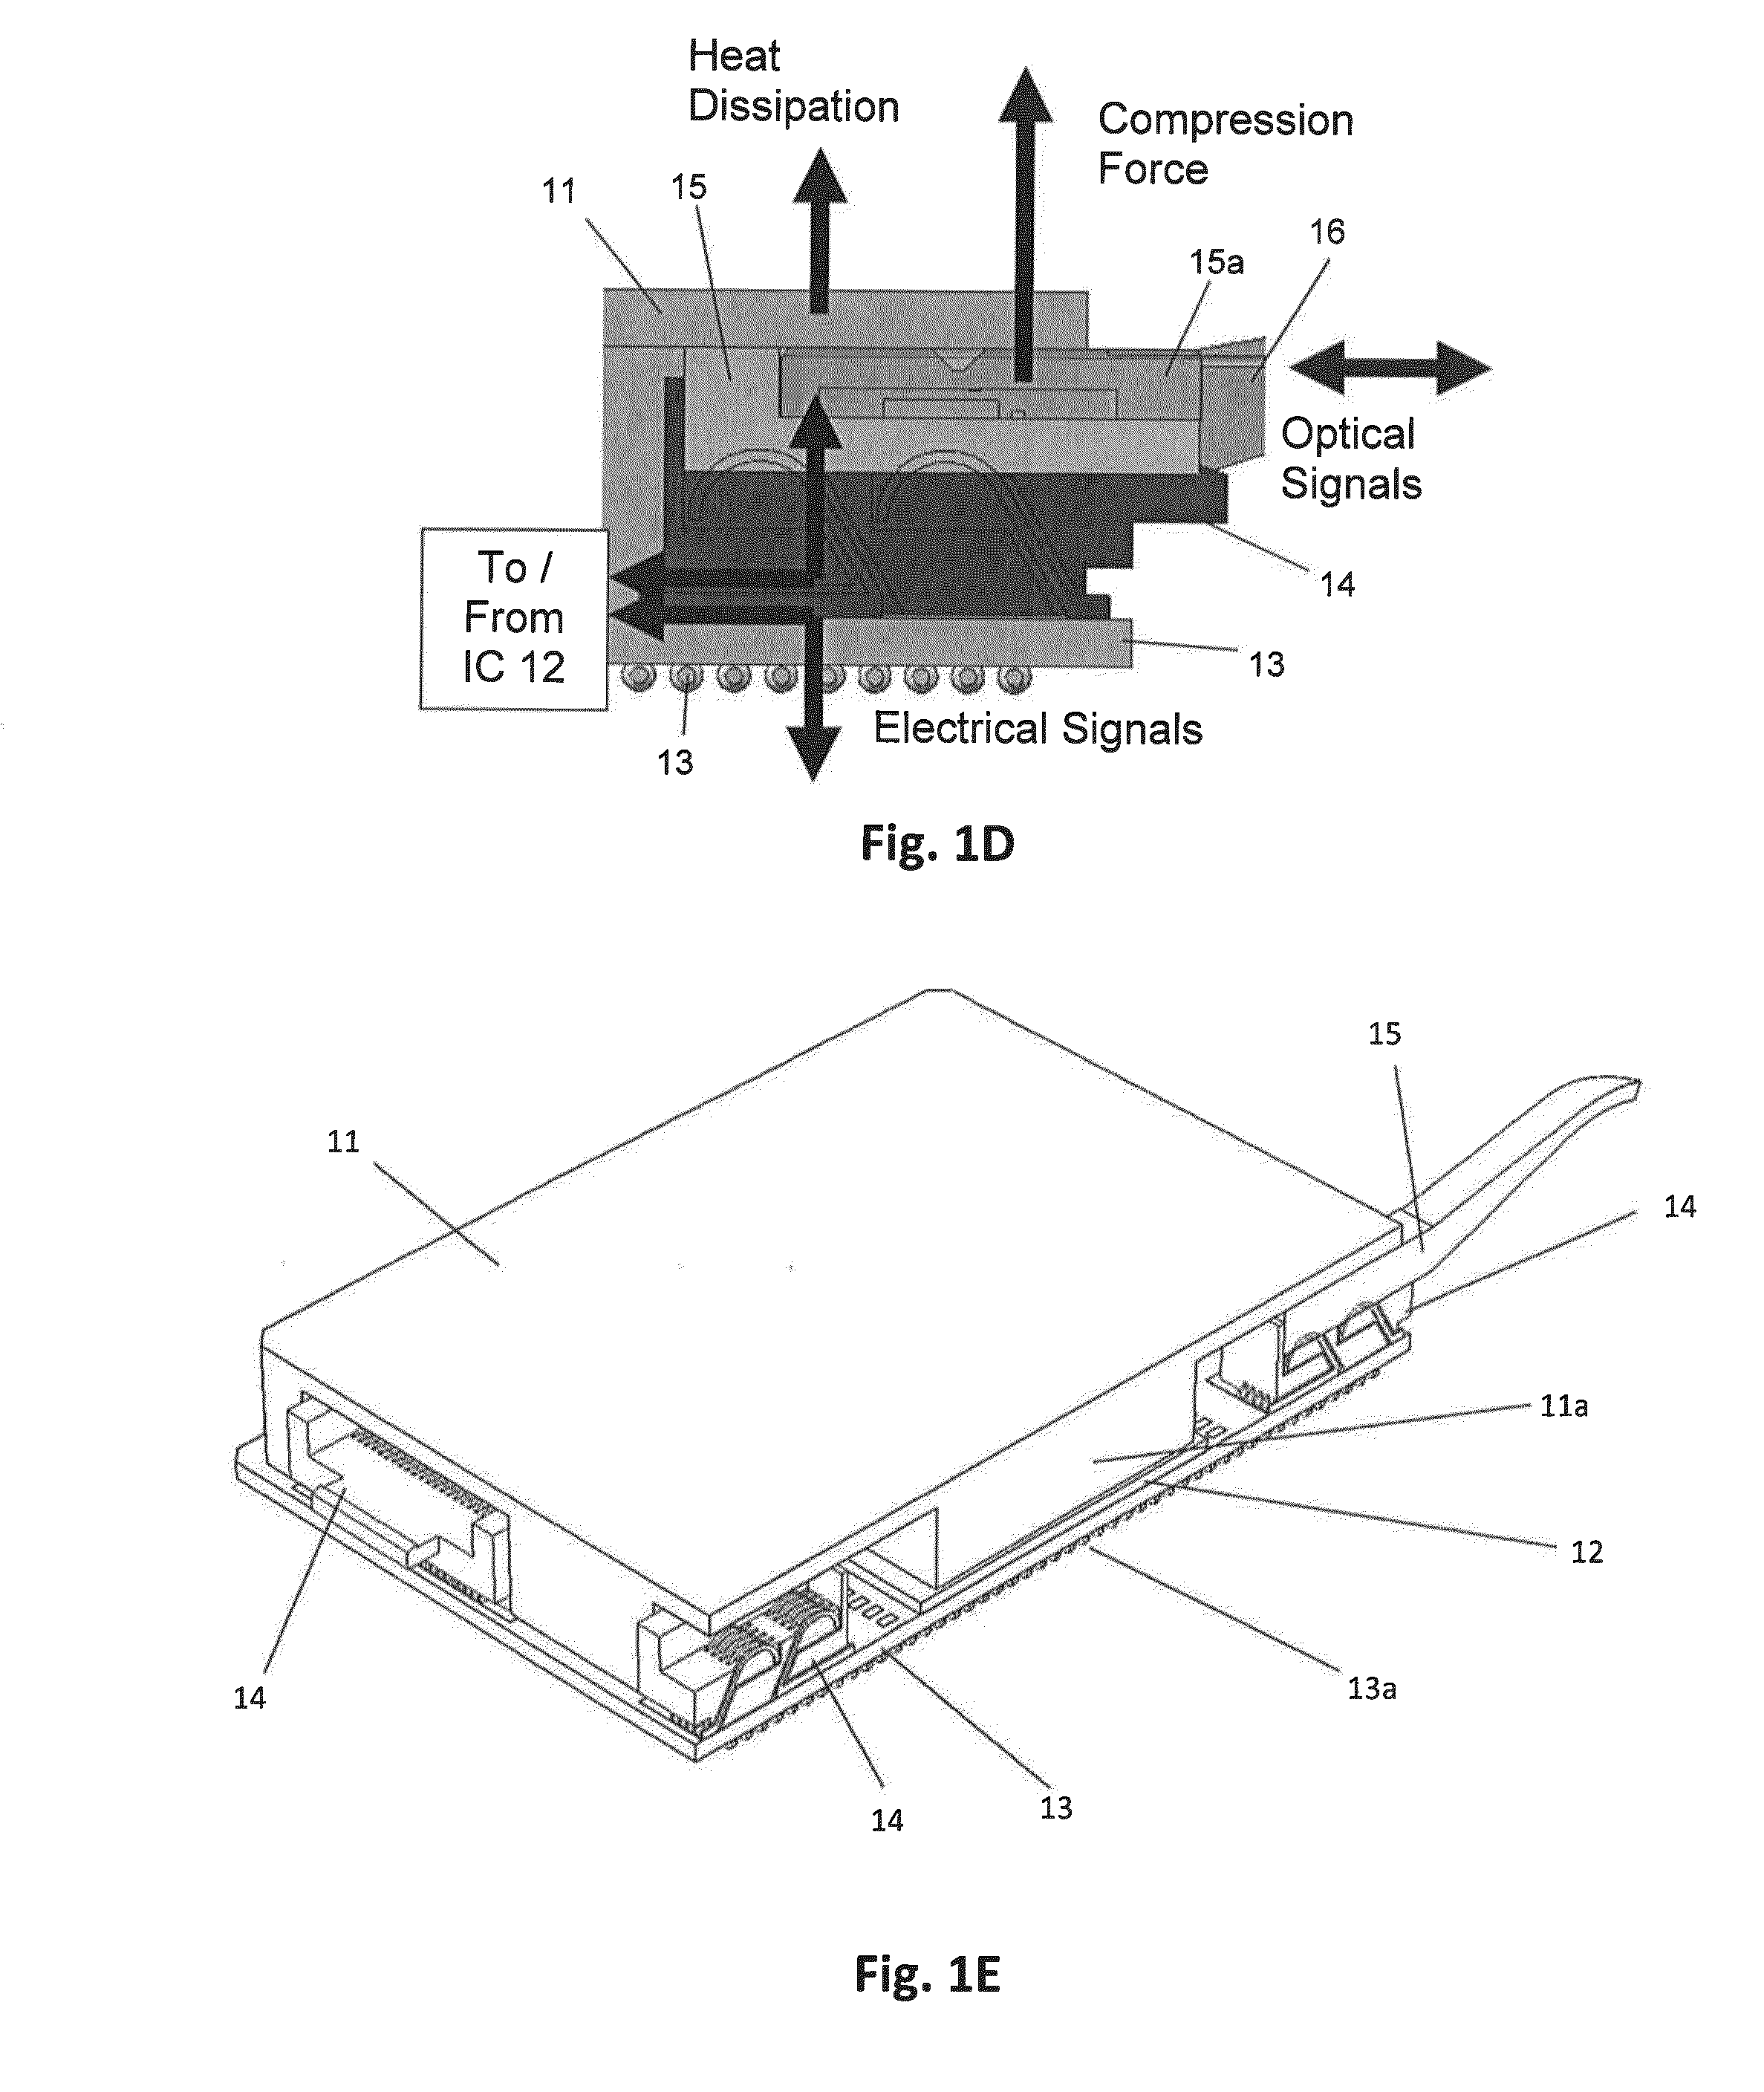 Transceiver and interface for IC package